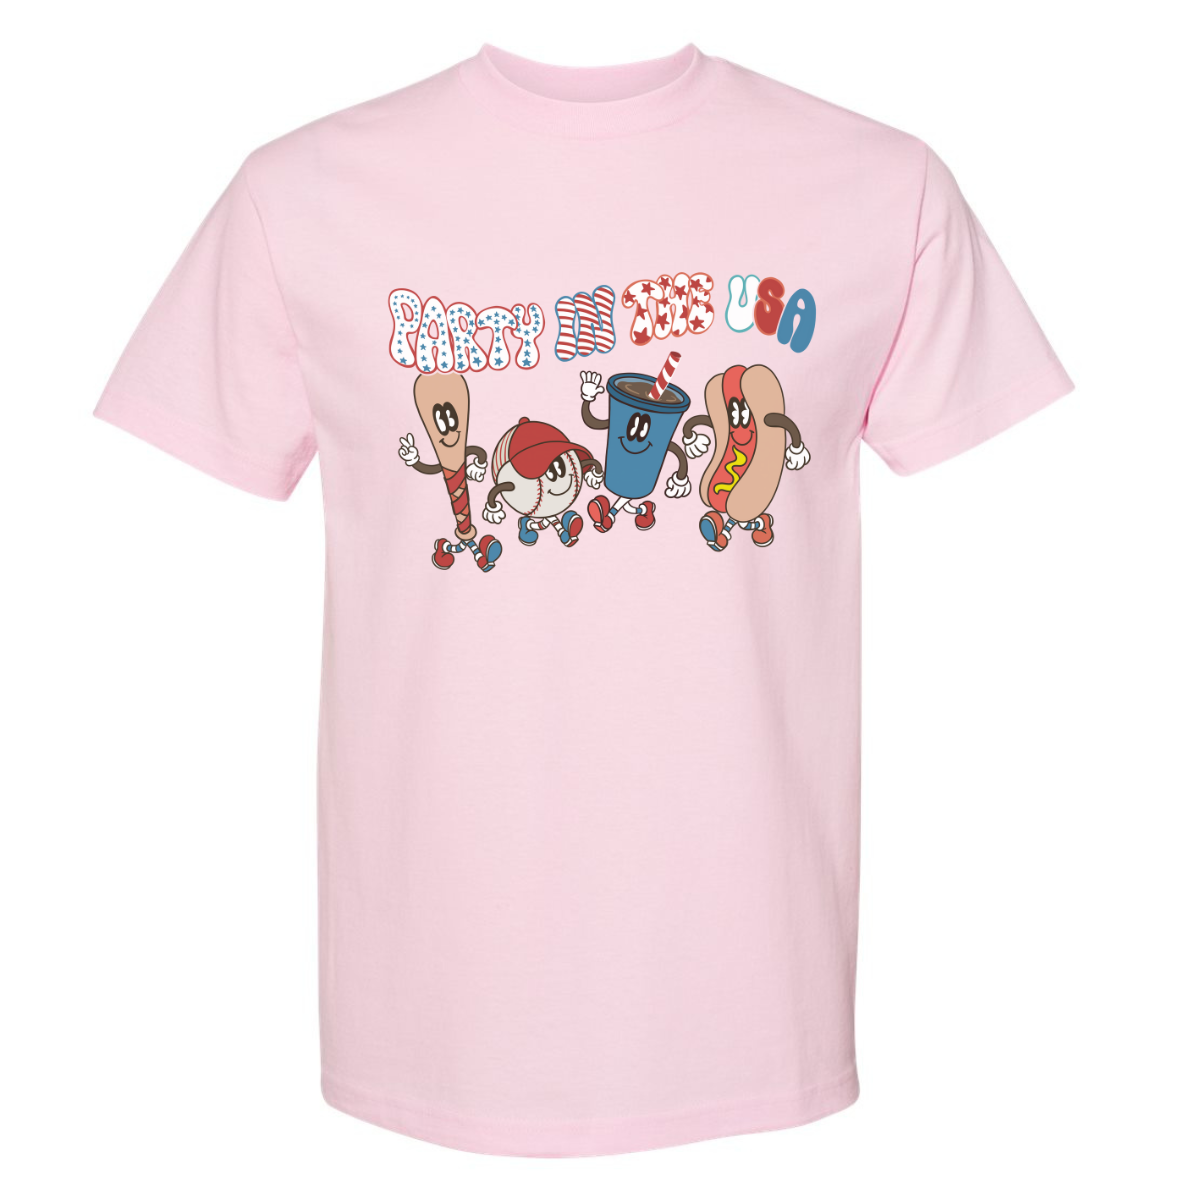 Party in the USA Graphic Printed Apparel